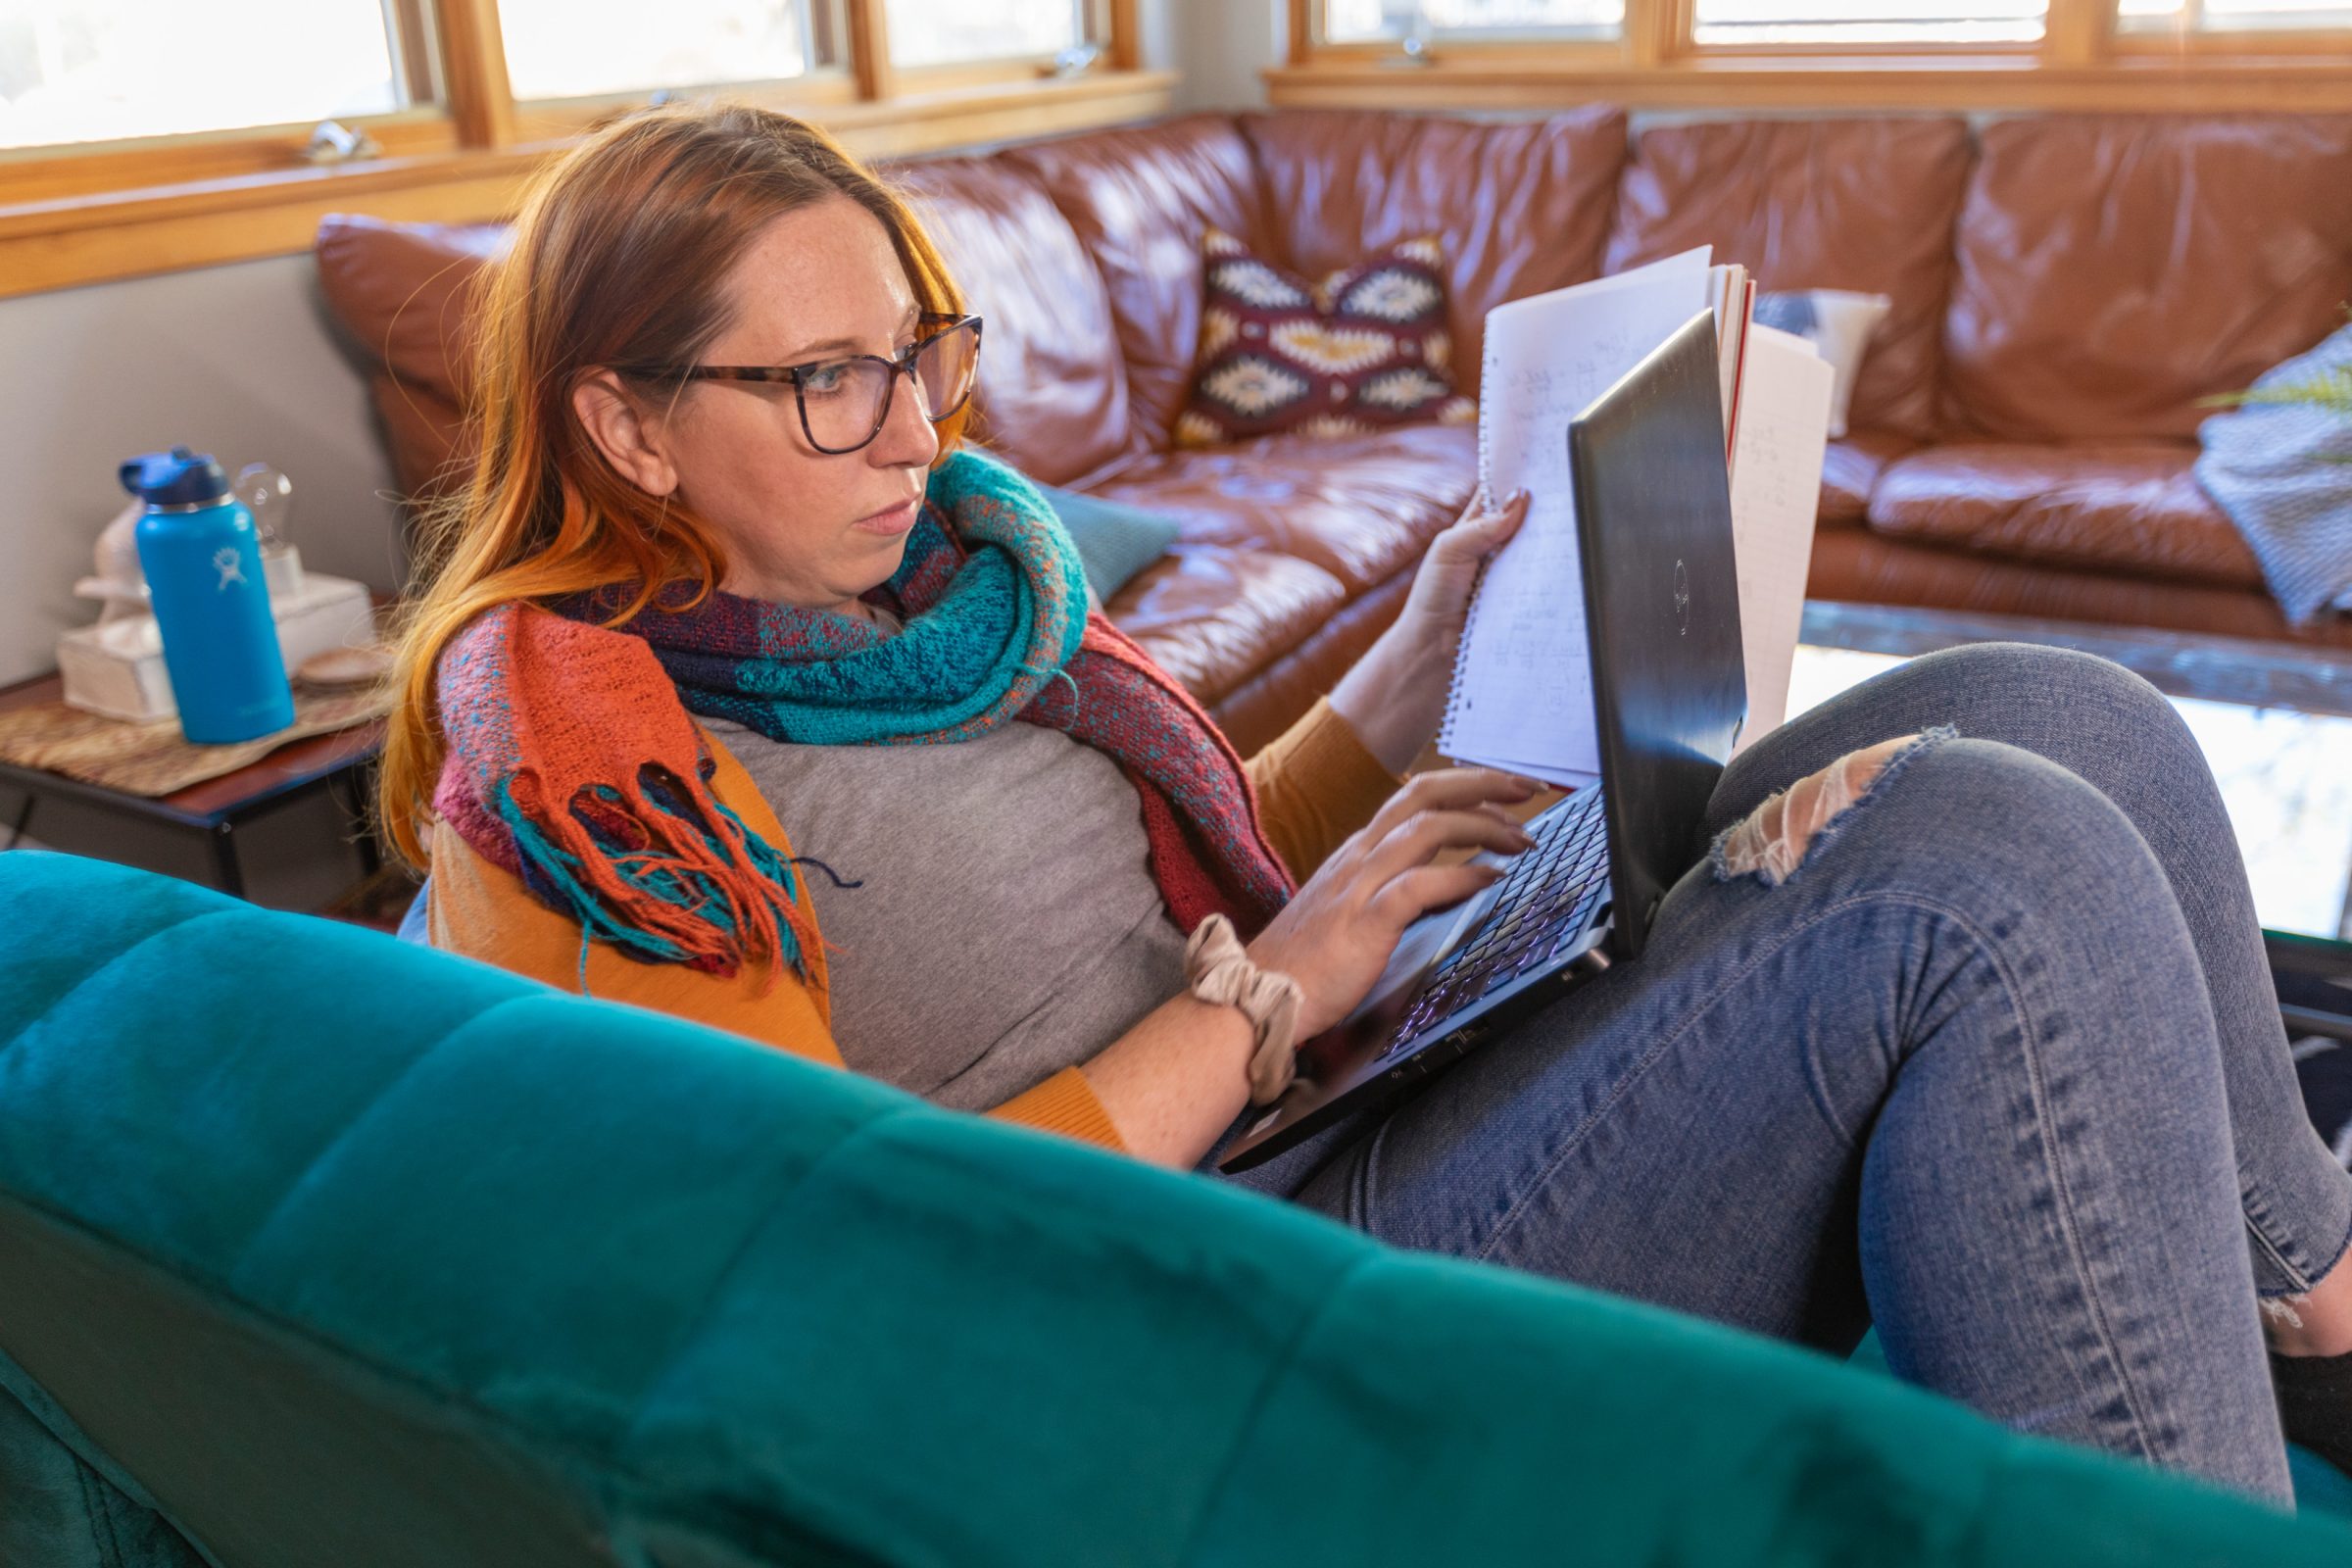 A student studies on the couch at home with a laptop and notebook.